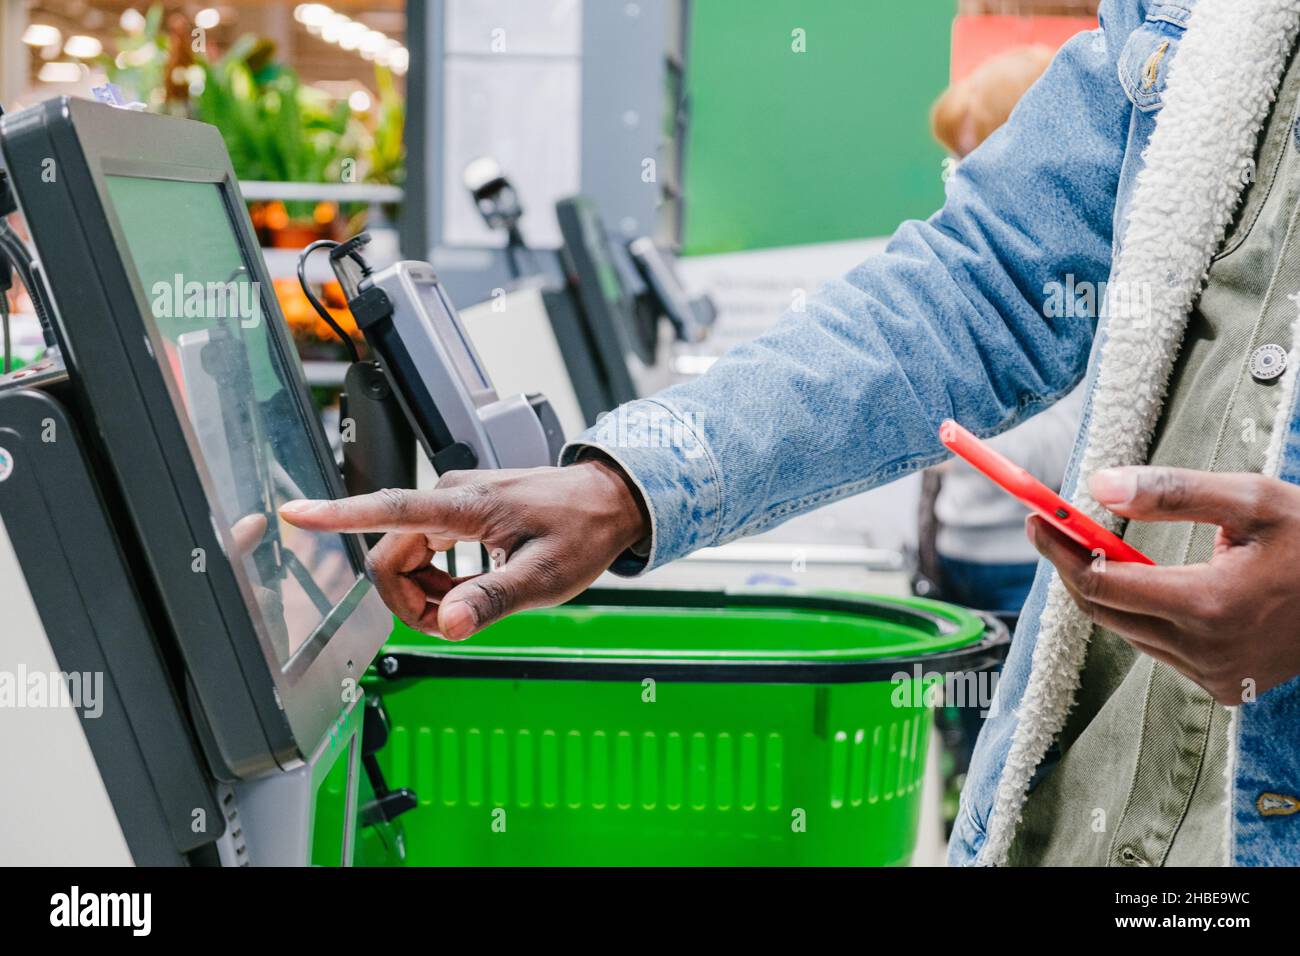 The finger of an African man in close-up at the supermarket checkout selects the desired product on the electronic screen of the cash register with a phone in his hands against the background of green shopping baskets, retail and self-service checkout in a hypermarket Stock Photo